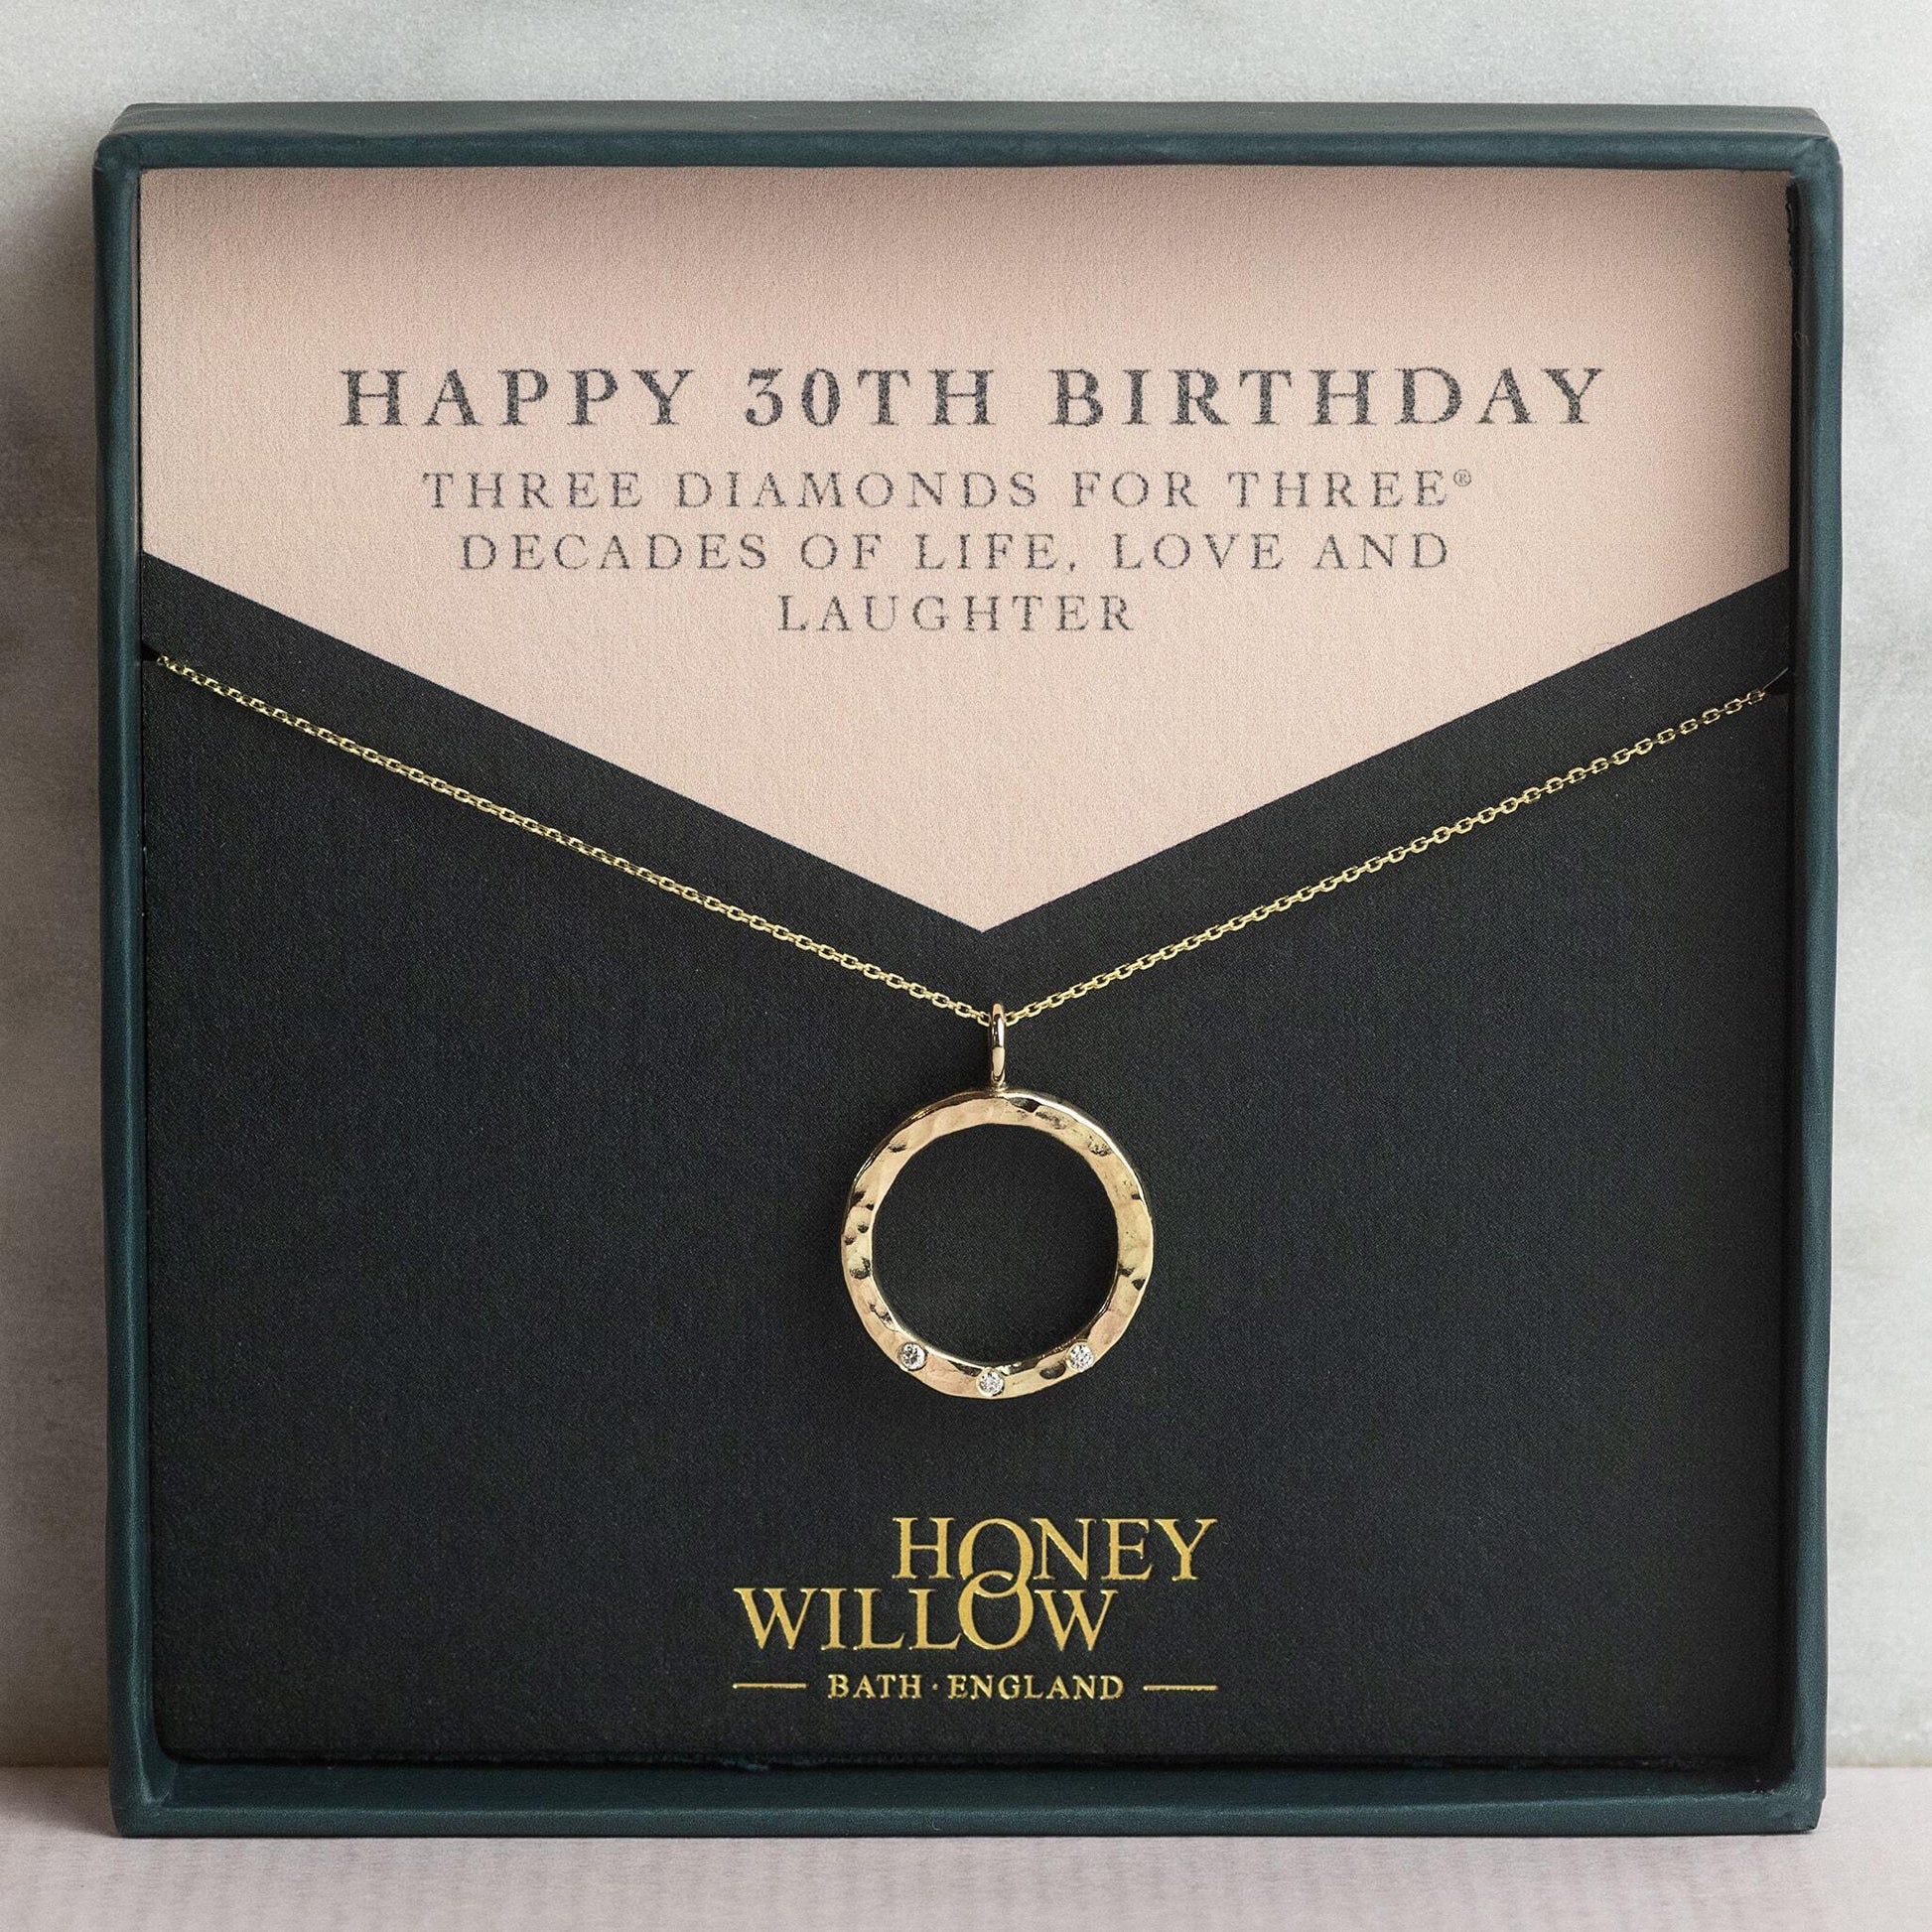 30th Birthday Gift - Recycled 9kt Gold Diamond Halo Necklace - 3 Diamonds for 3® Decades